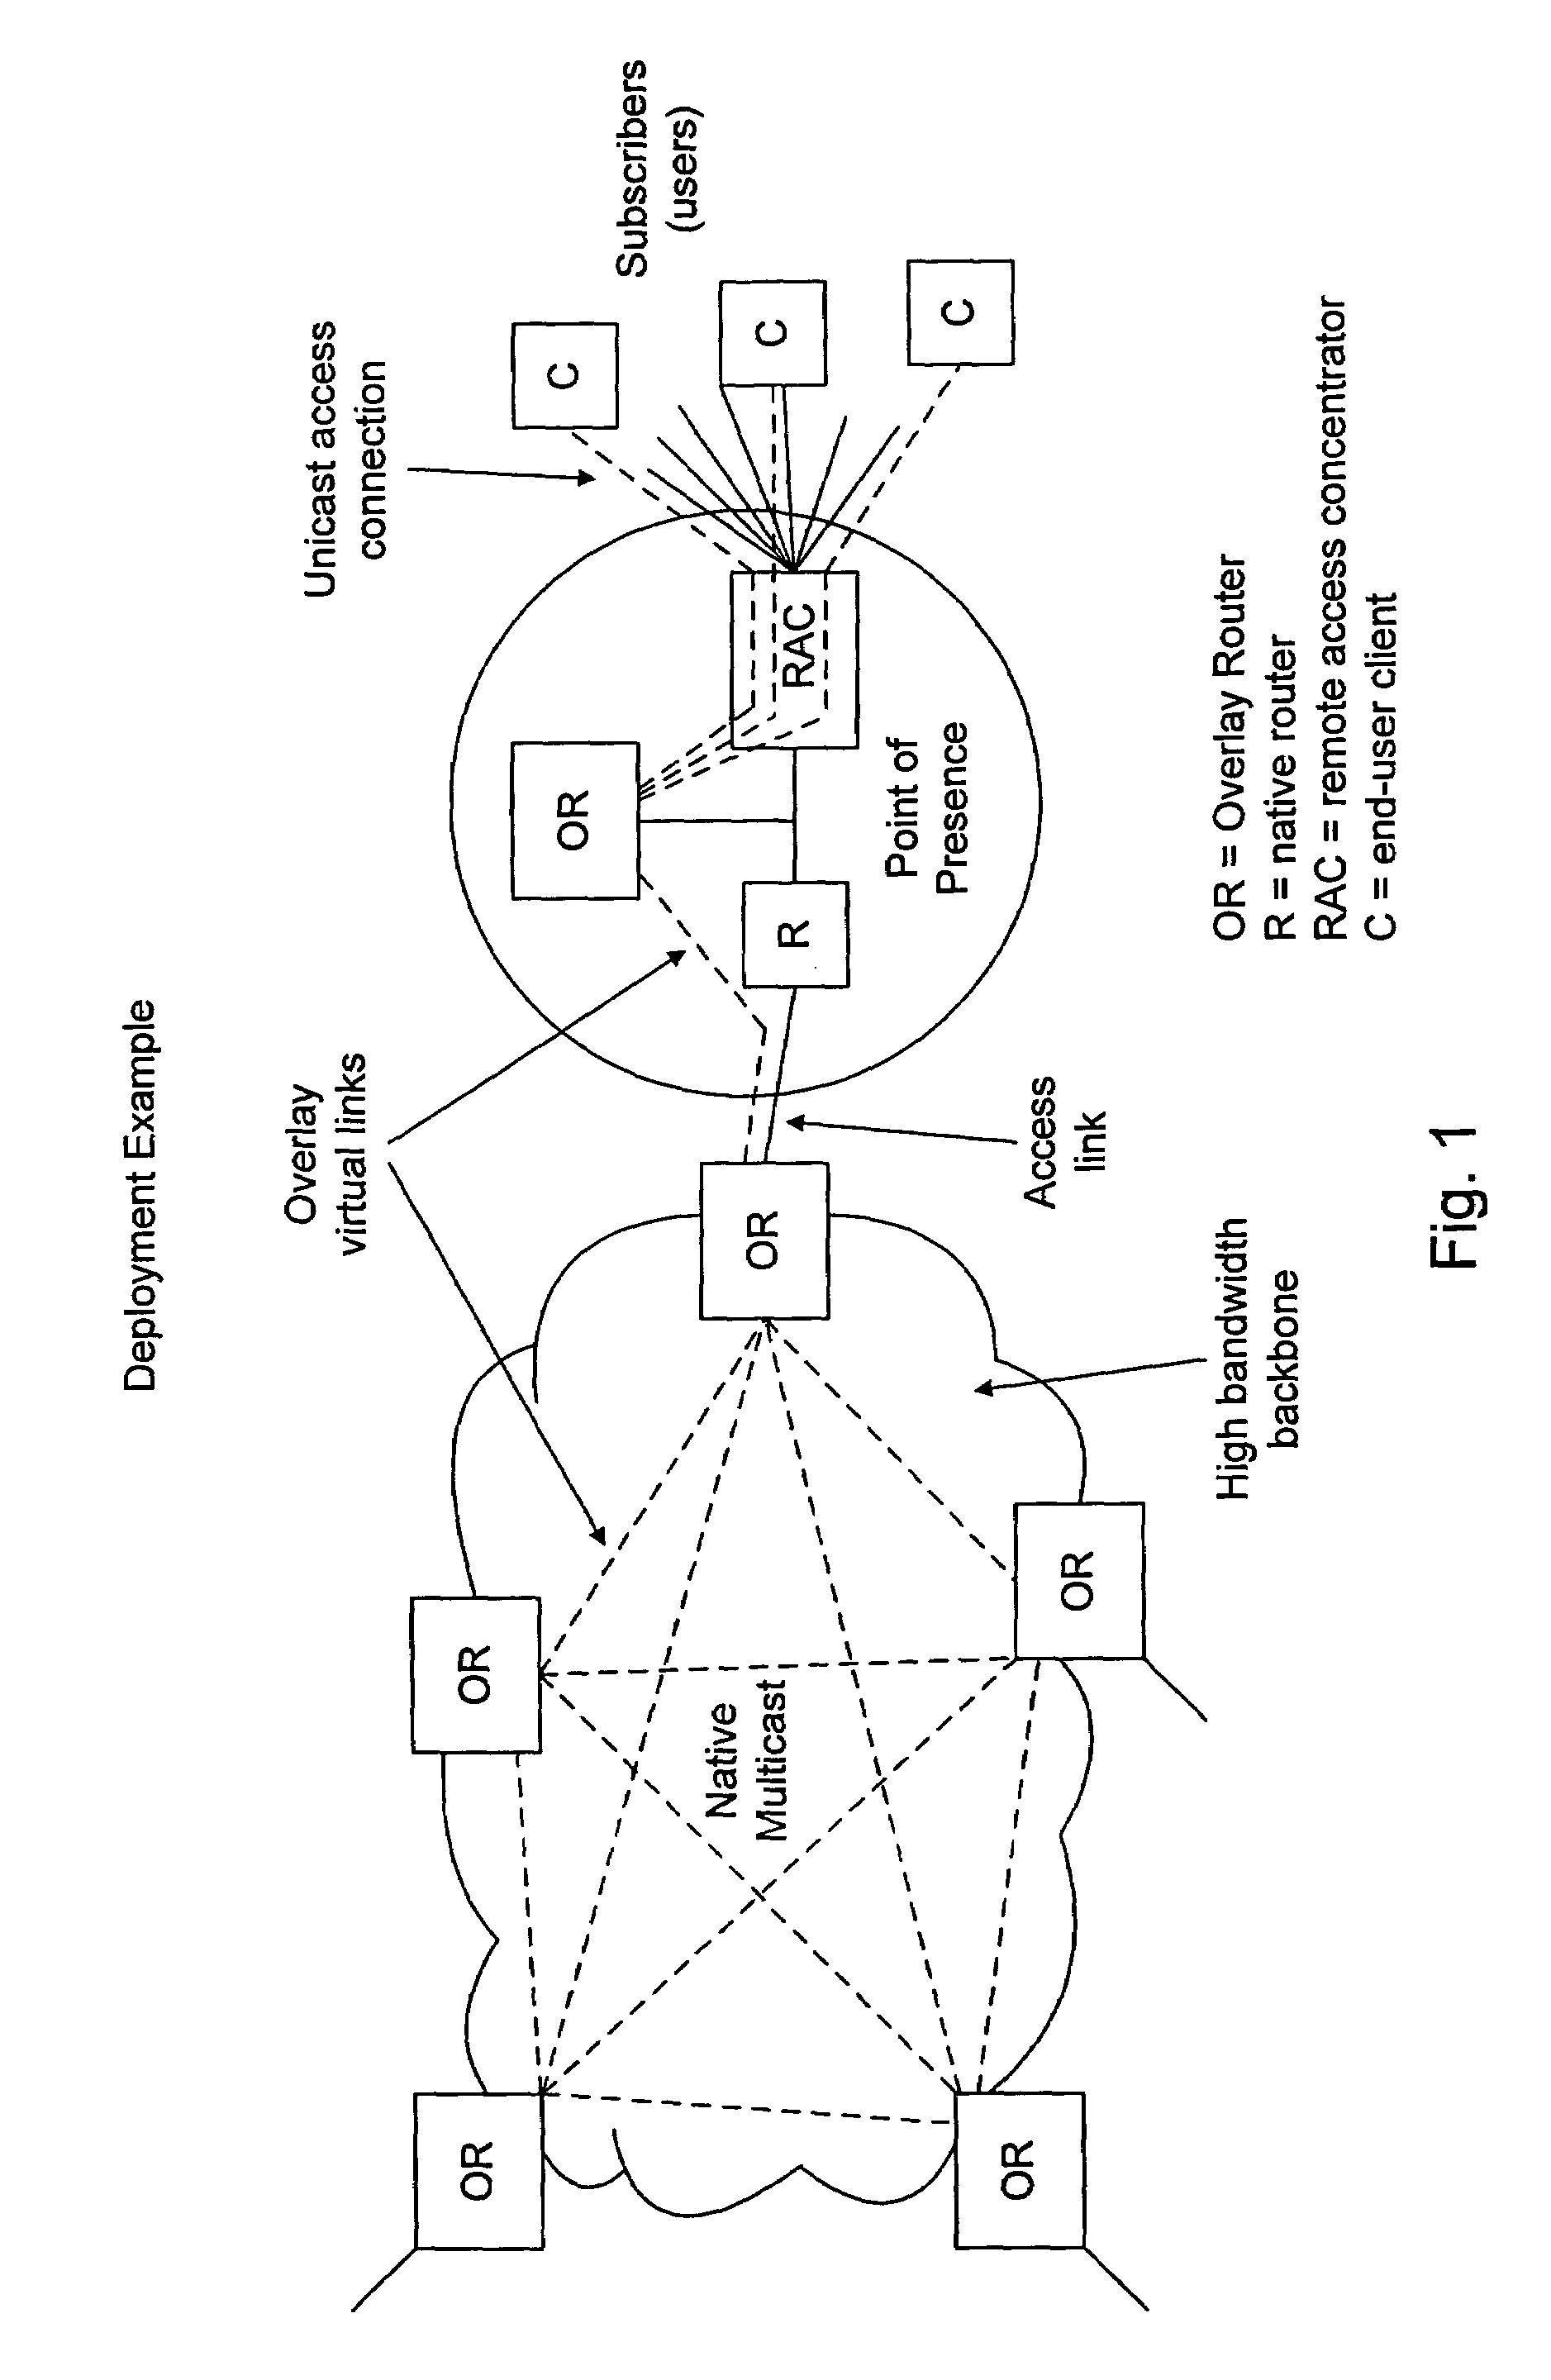 Performing multicast communication in computer networks by using overlay routing